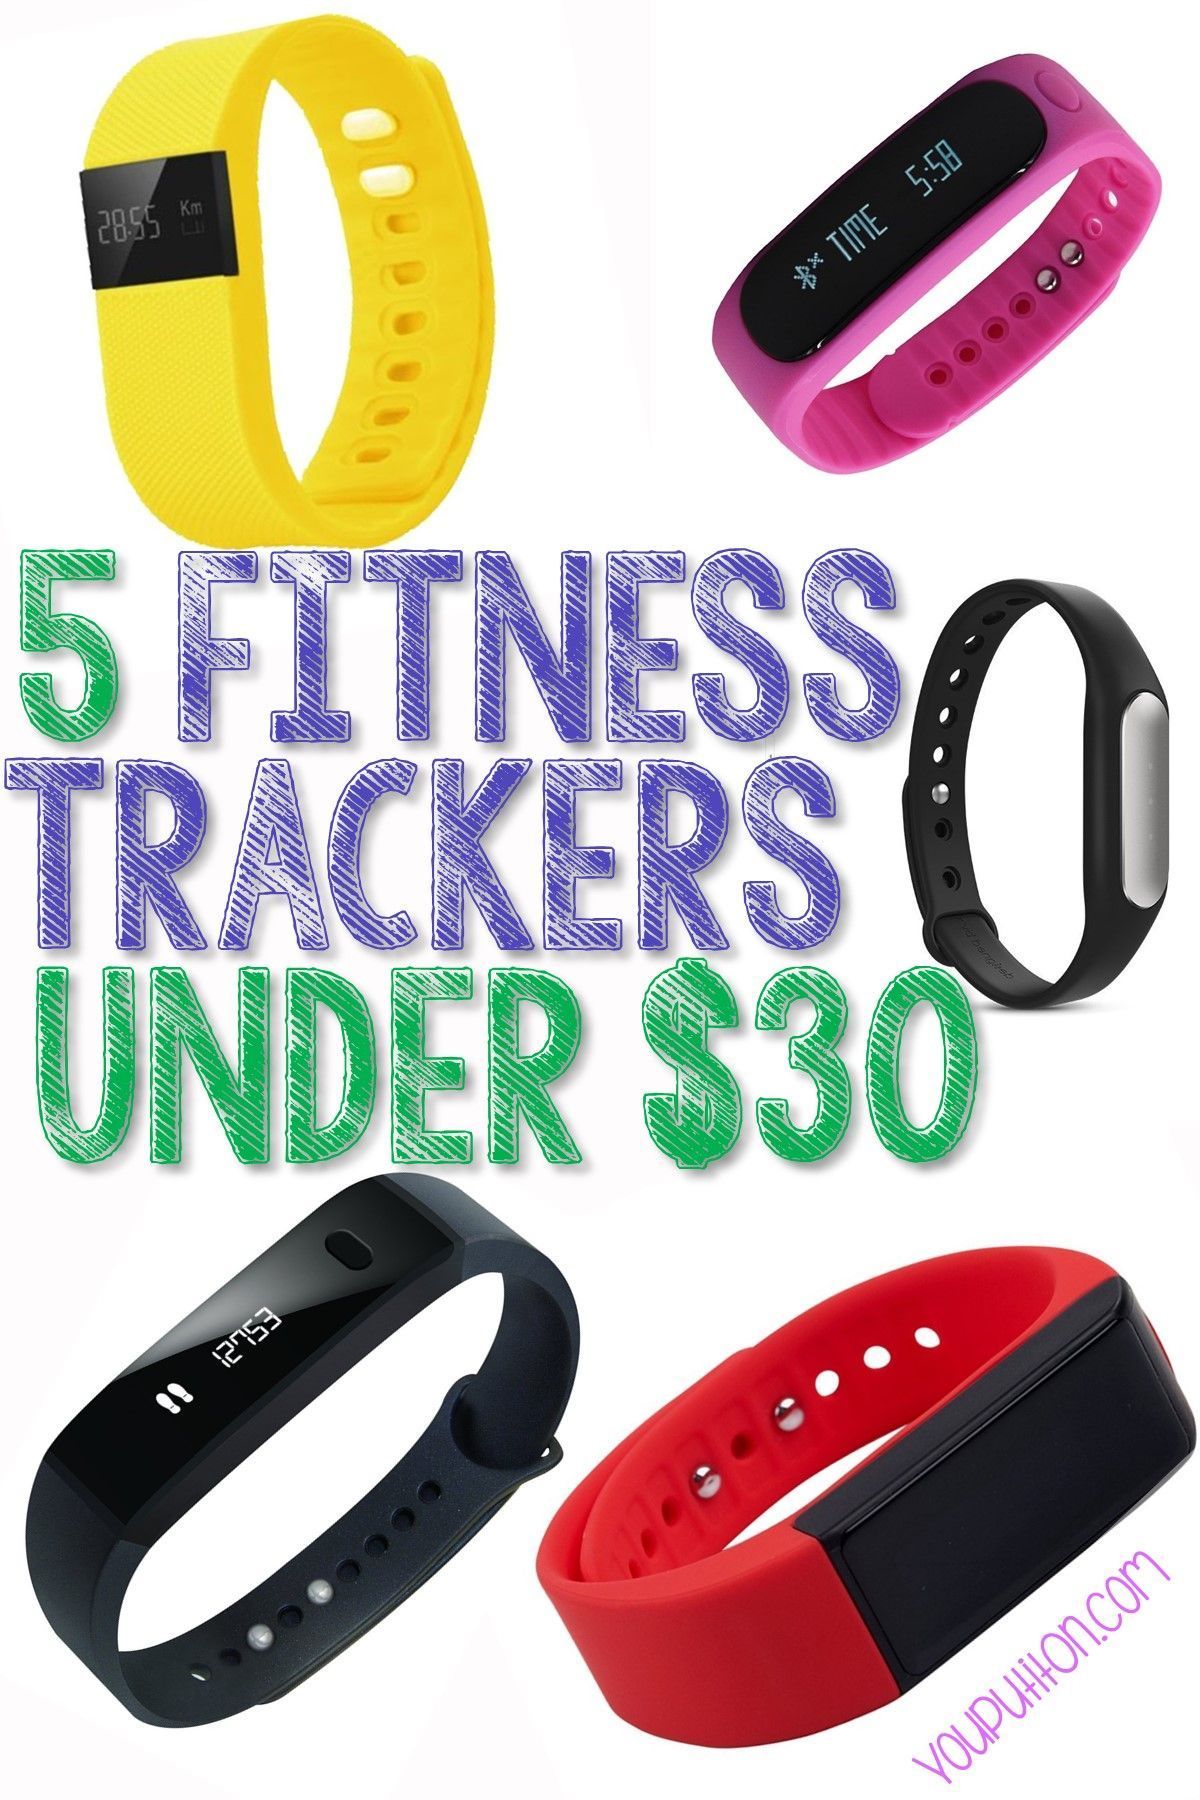 5 Budget Fitness Trackers – $30 or less! - You Put It On -   fitness Tracker budget